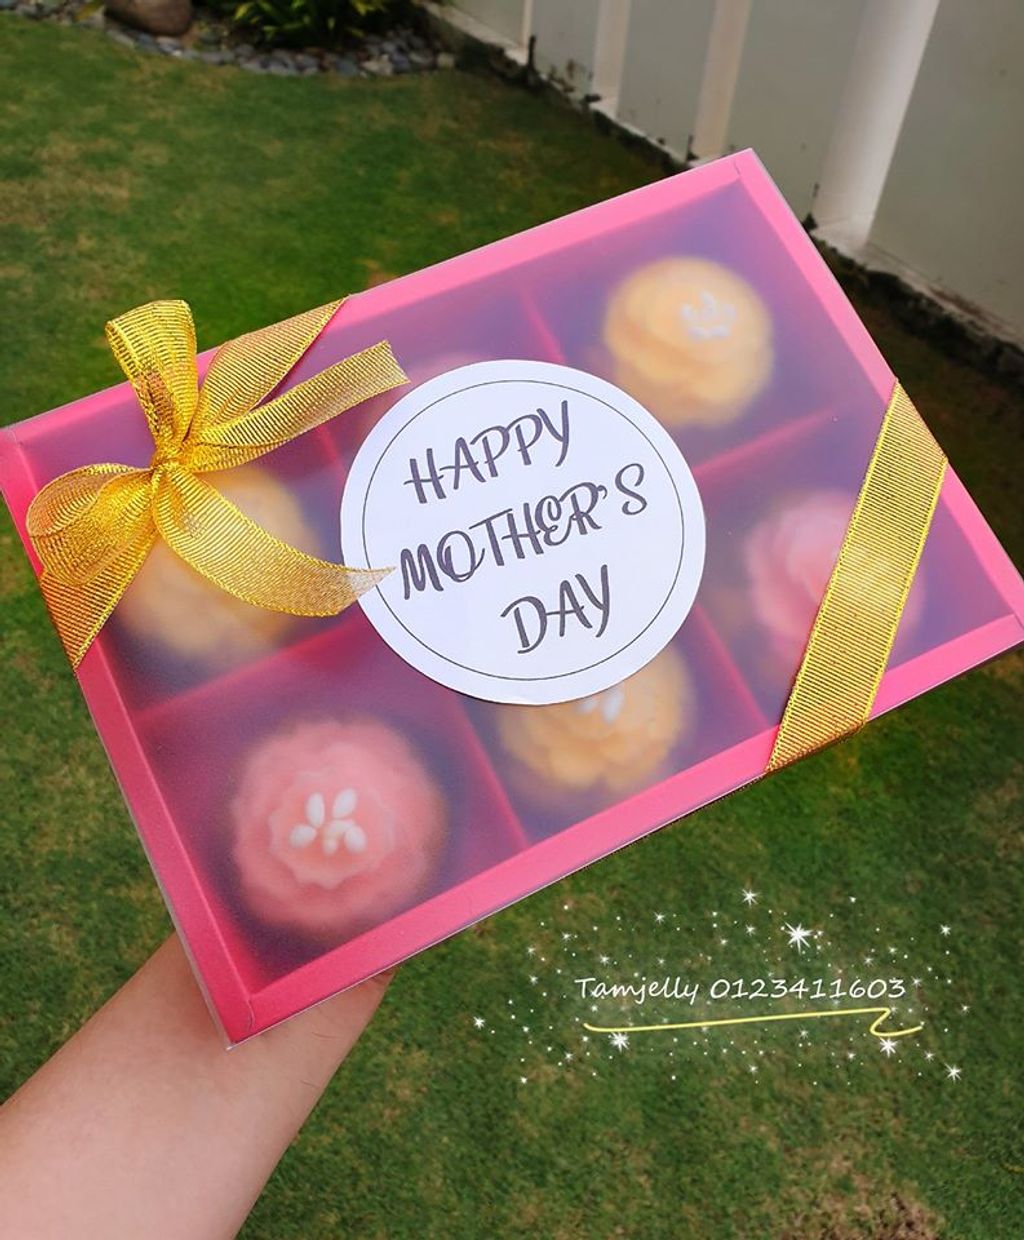 What to gift for Mother's Day during MCO 2020